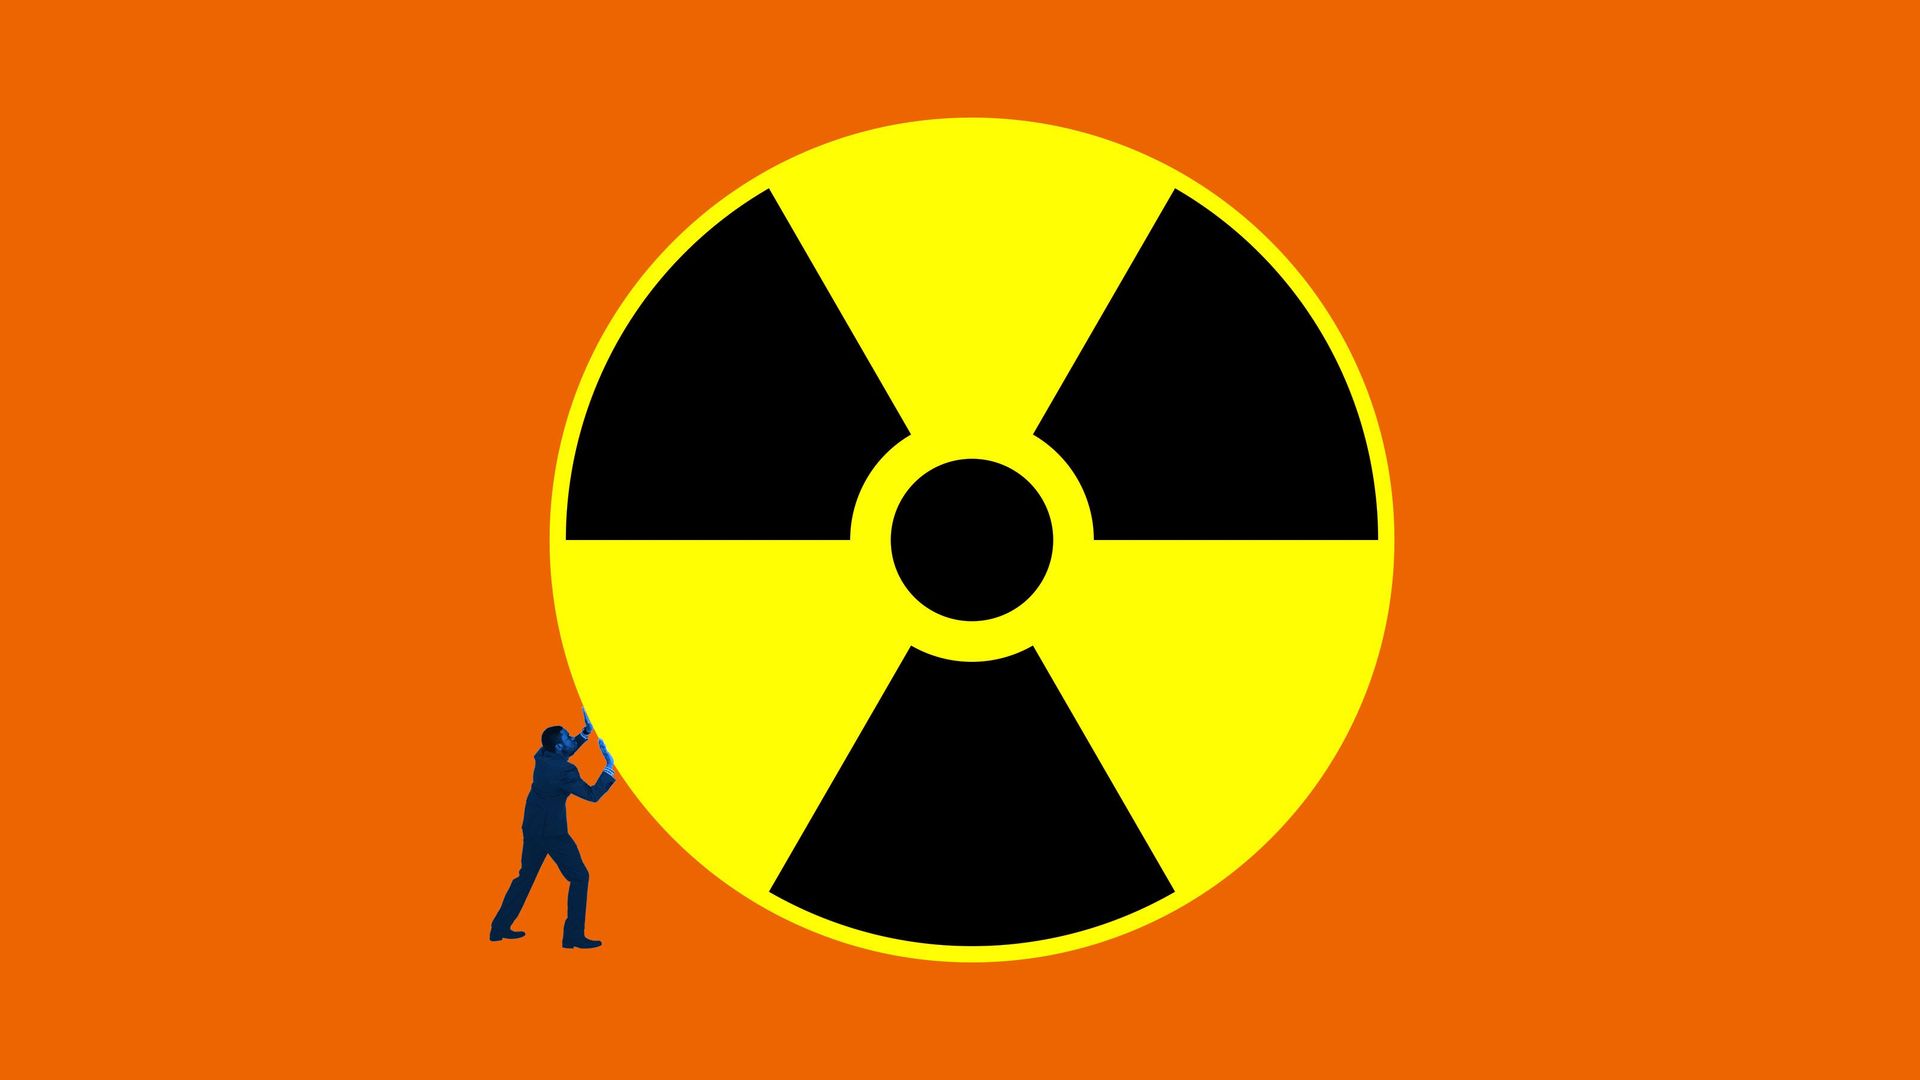 Illustration of a man pushing a nuclear symbol.